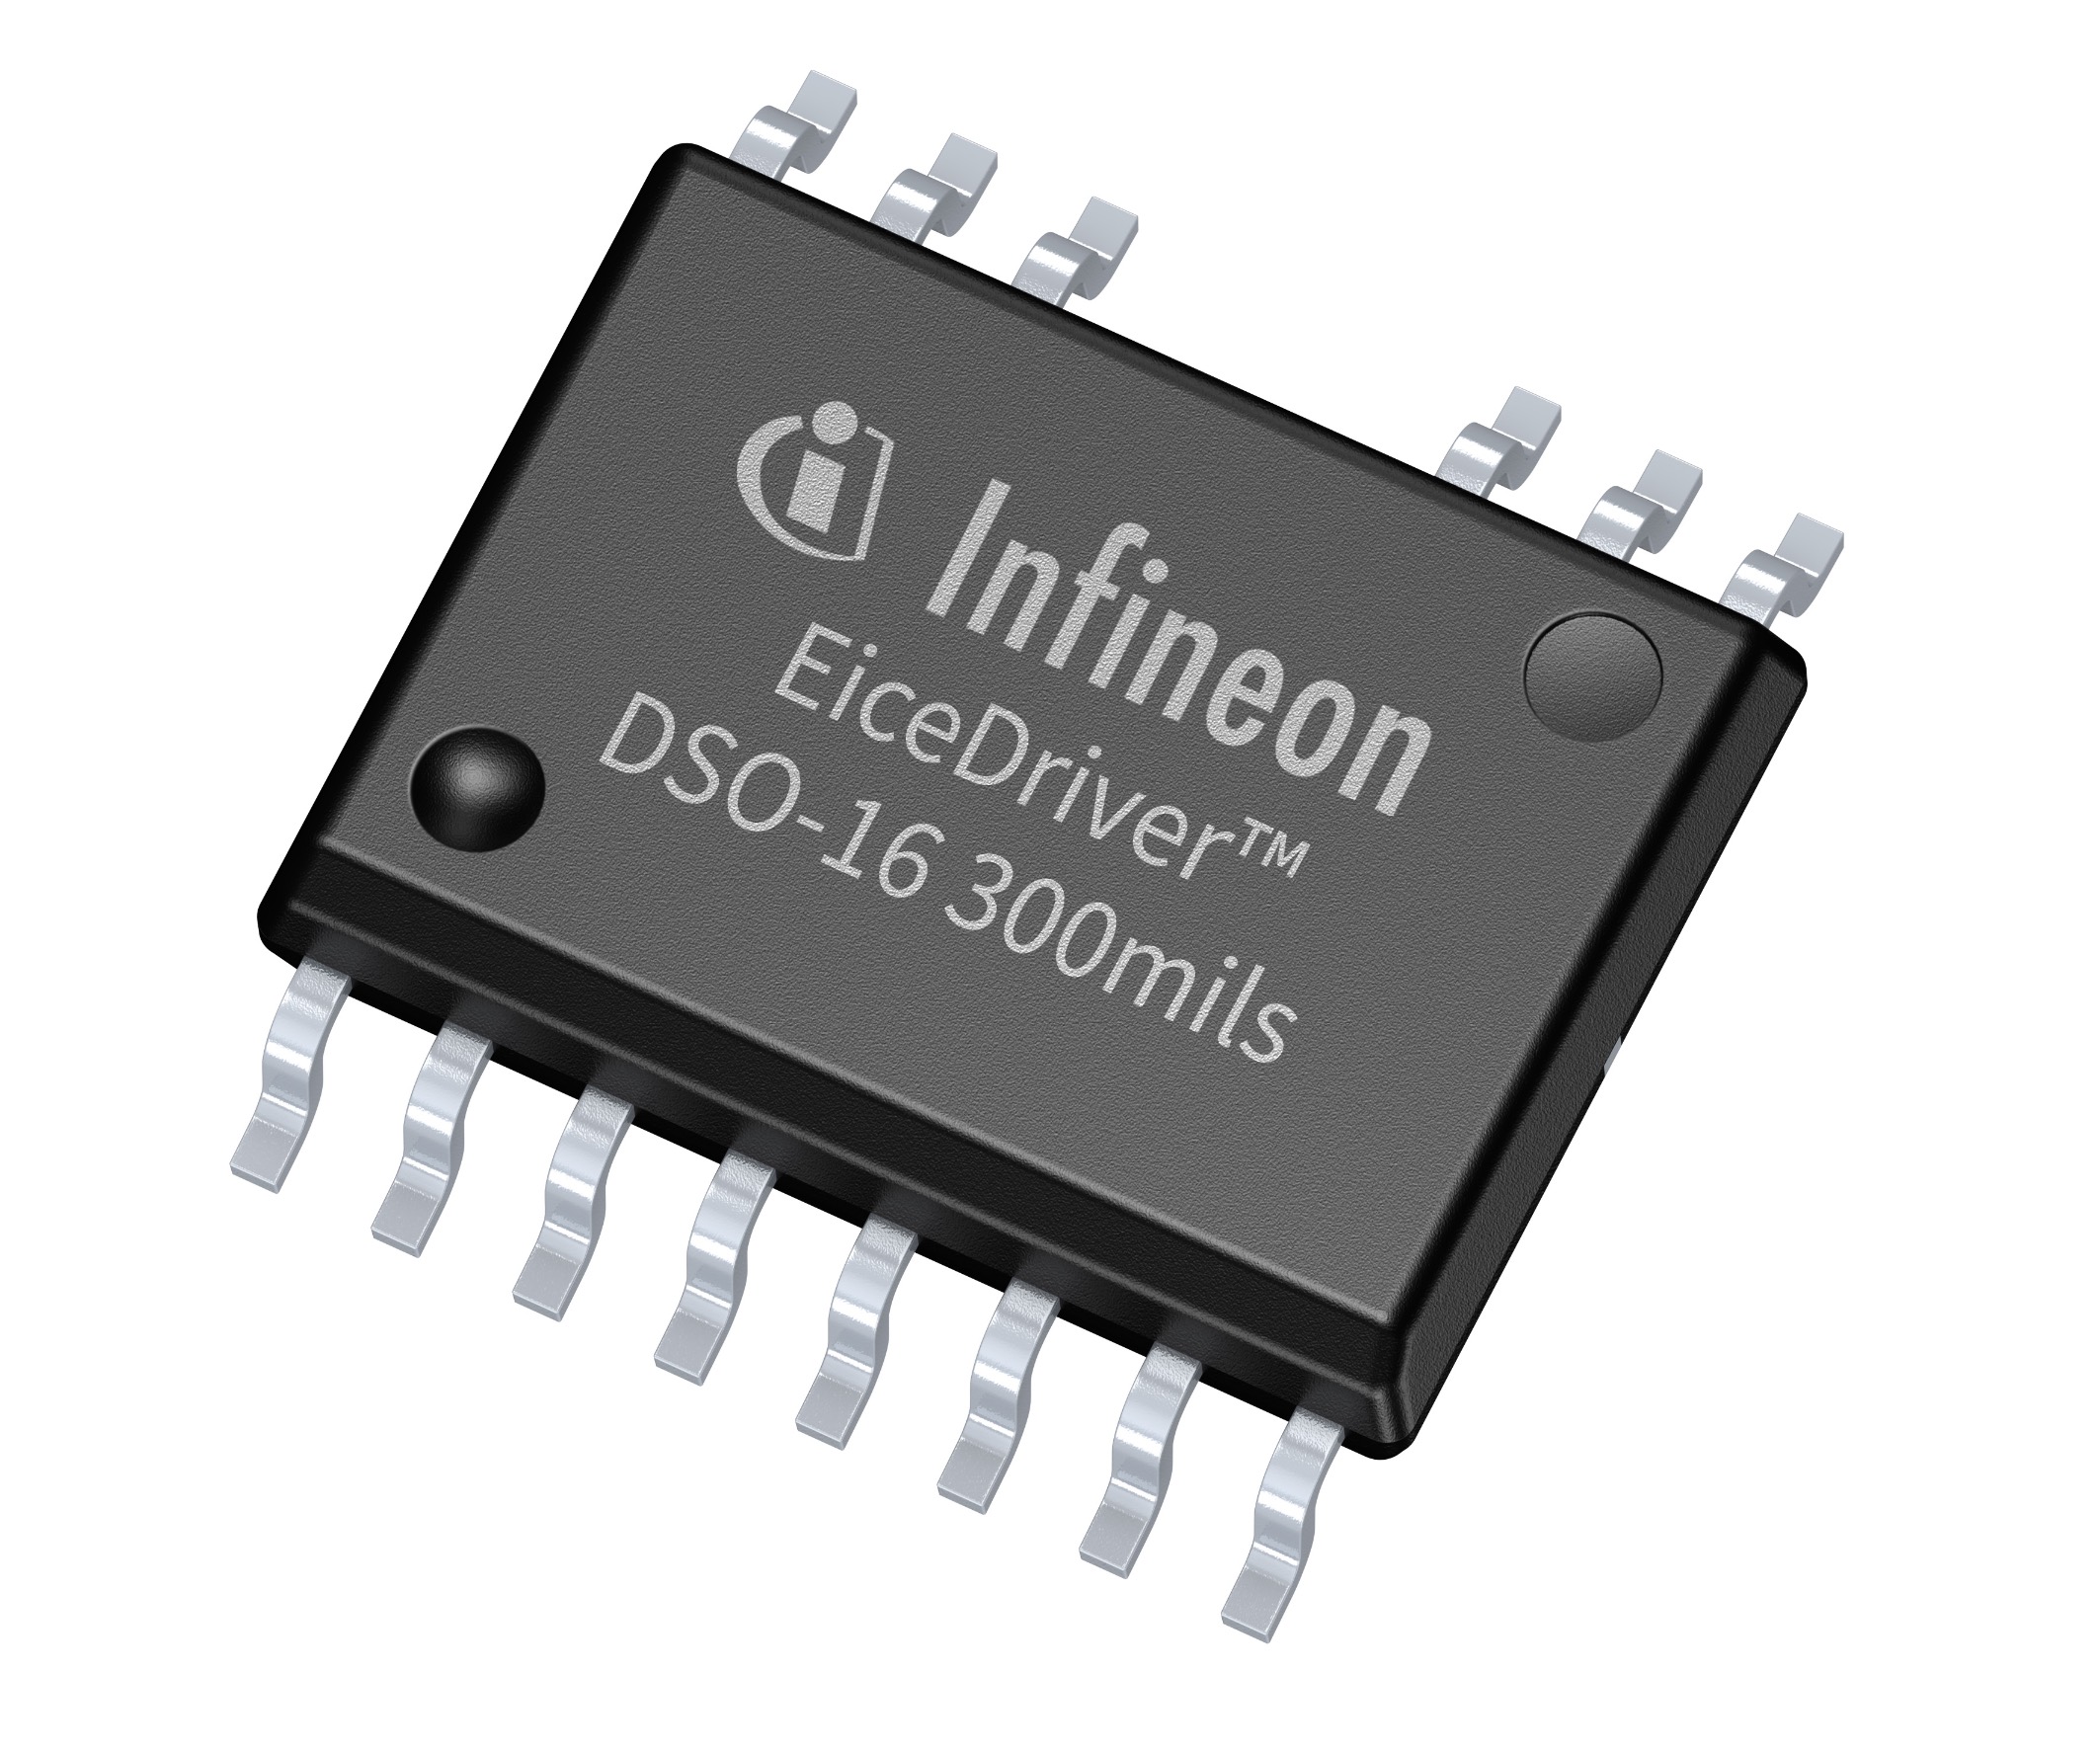 1200 V Half-Bridge Driver IC Family with Active Miller Clamp for Optimized Ruggedness in High Power Systems